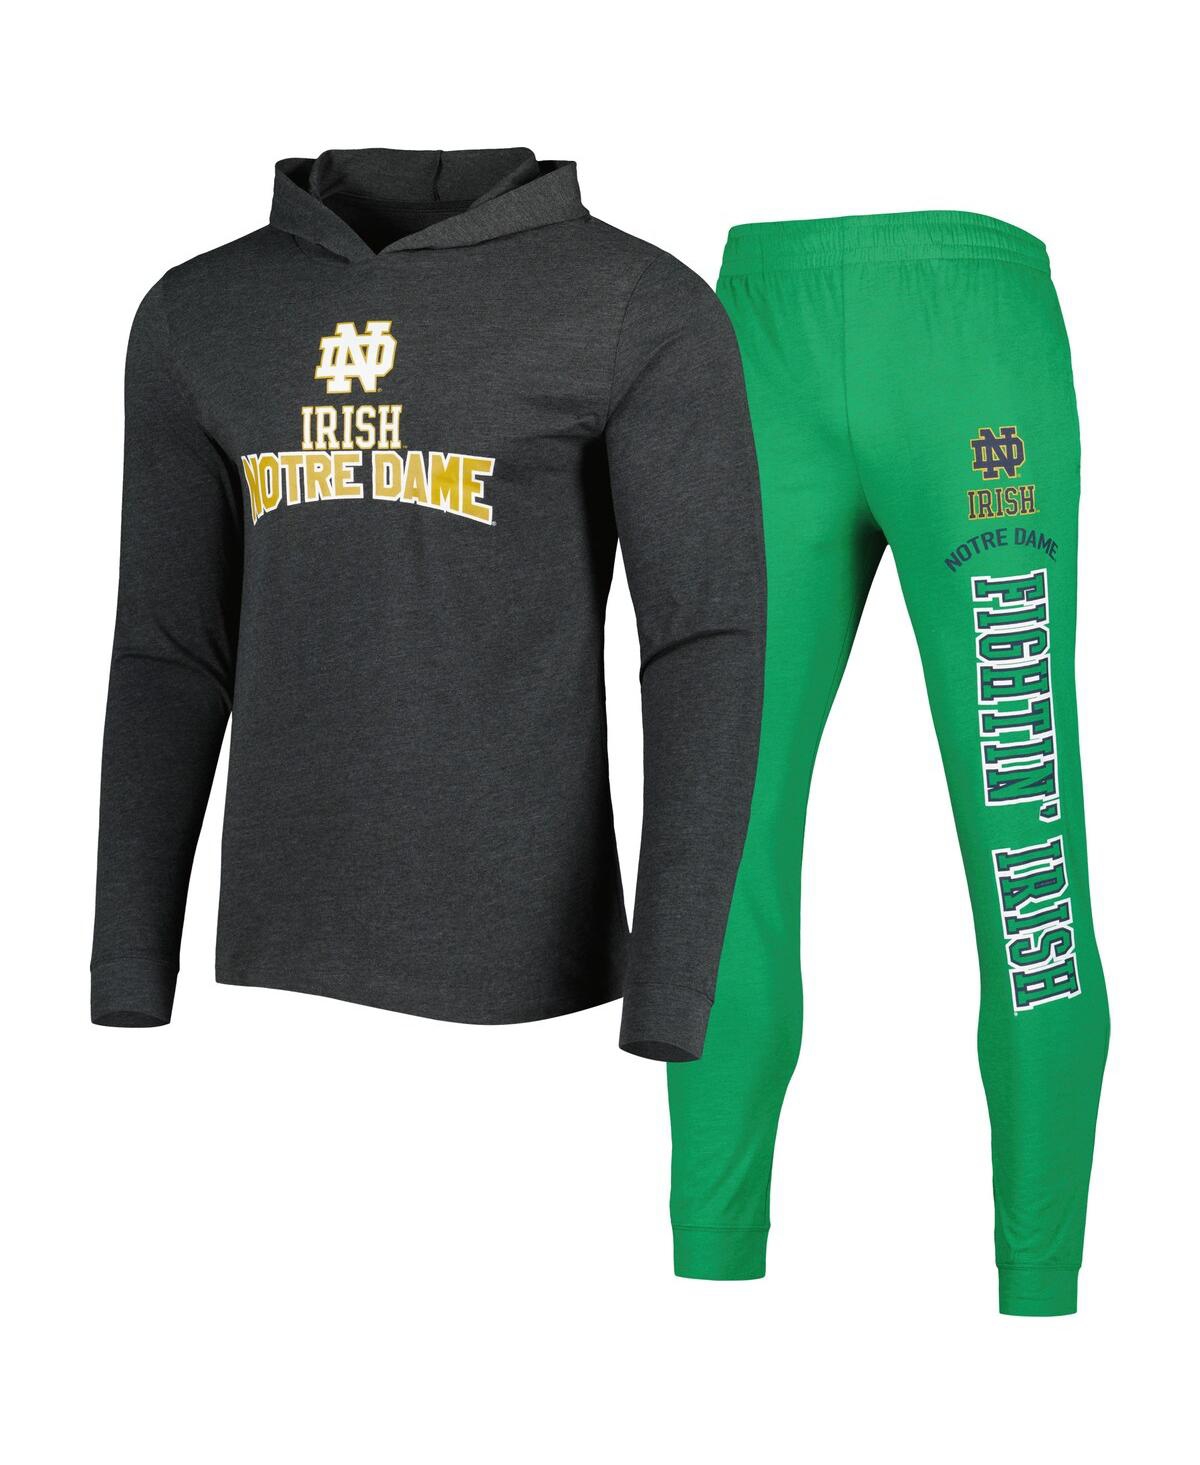 Men's Concepts Sport Heathered Green, Heathered Charcoal Notre Dame Fighting Irish Meter Long Sleeve Hoodie T-shirt and Jogger Pants Set - Heathered G